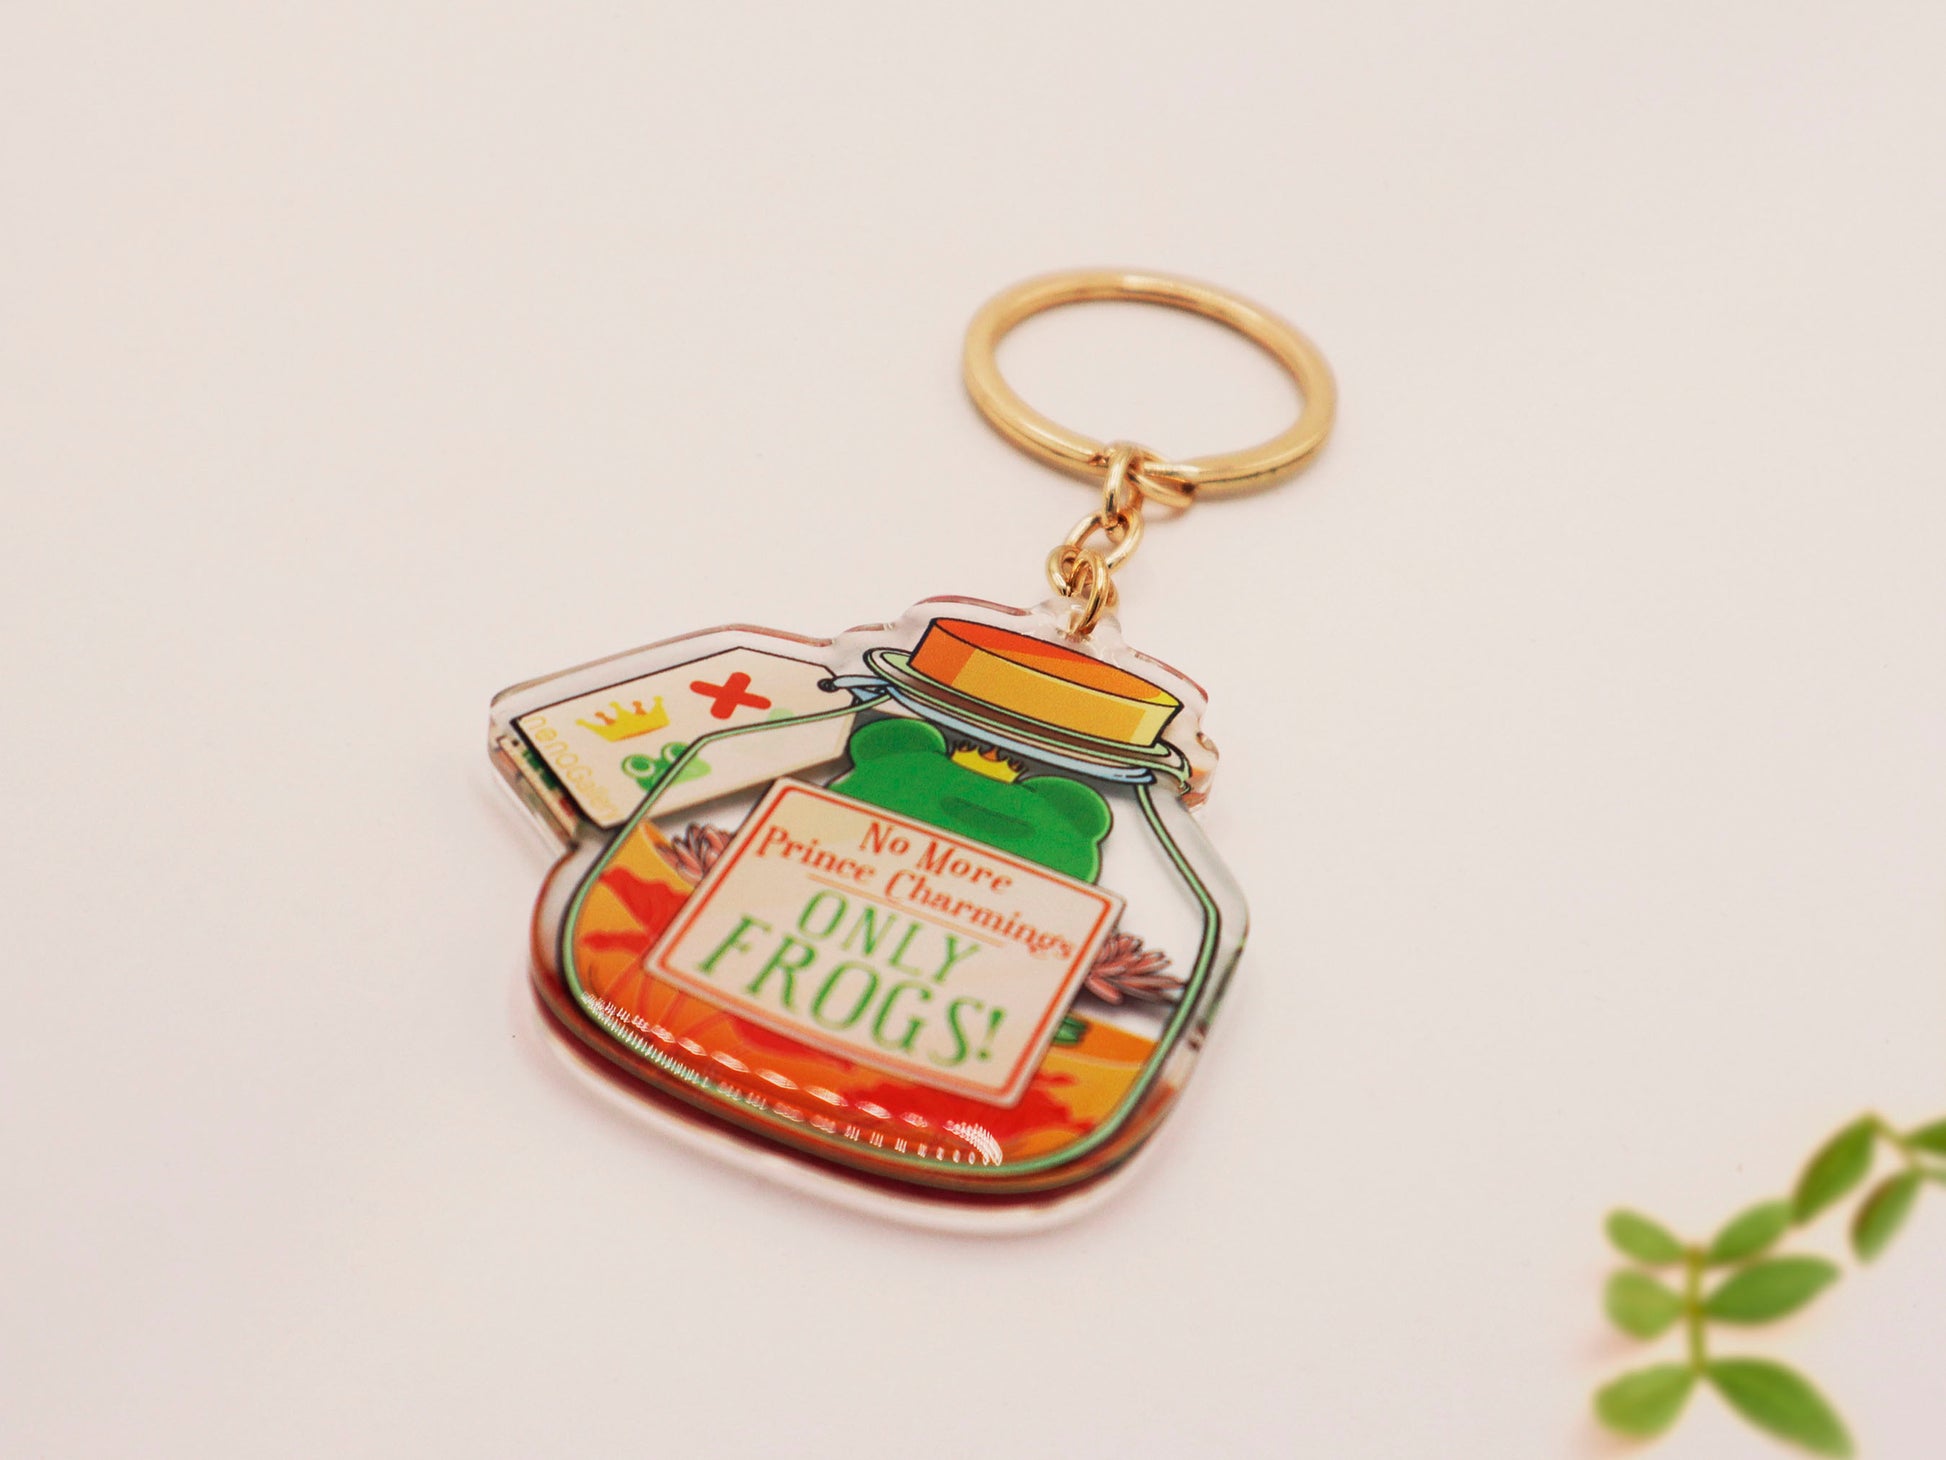 Double sided epoxy keychain with golden clasp of a frog inside a potion bottle looking glum wearing a small crown and sat on a lily pad., with the potion bottle labelled Frog Transformation Potion